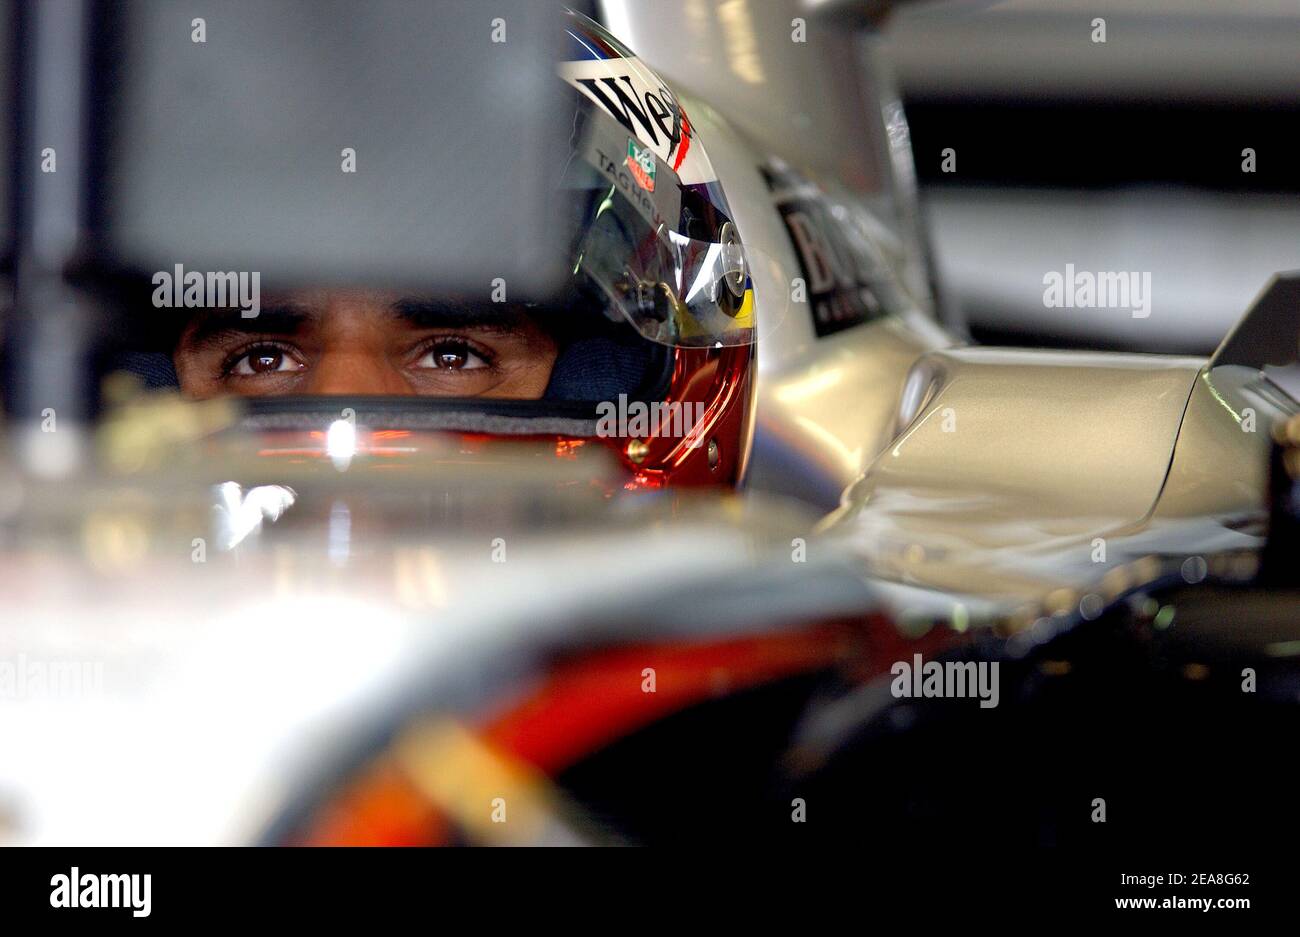 Colombian Formula 1 driver Juan Pablo Montoya (team McLaren Mercedes) during the G.P of the Sepang circuit, Malaysia, on March 19, 2005. Photo by Thierry Gromik/ABACA Stock Photo